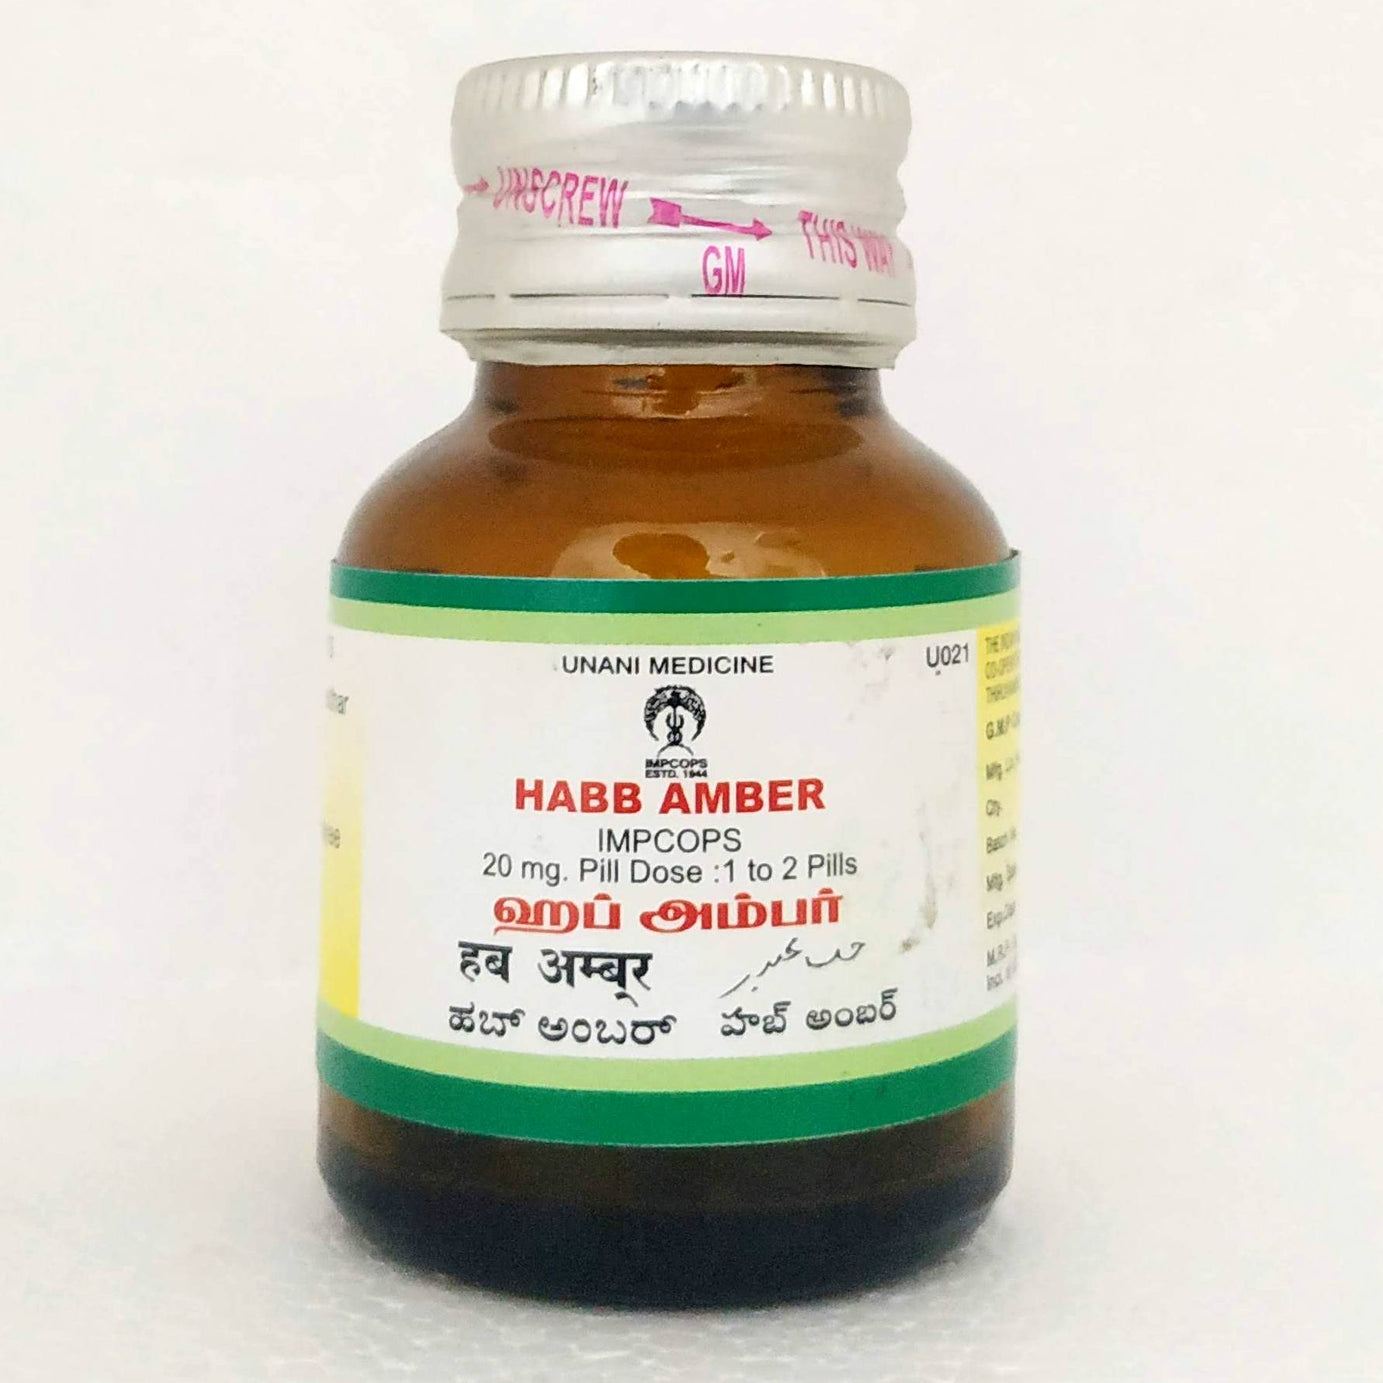 Shop Habb amber 2gm at price 1826.00 from Impcops Online - Ayush Care